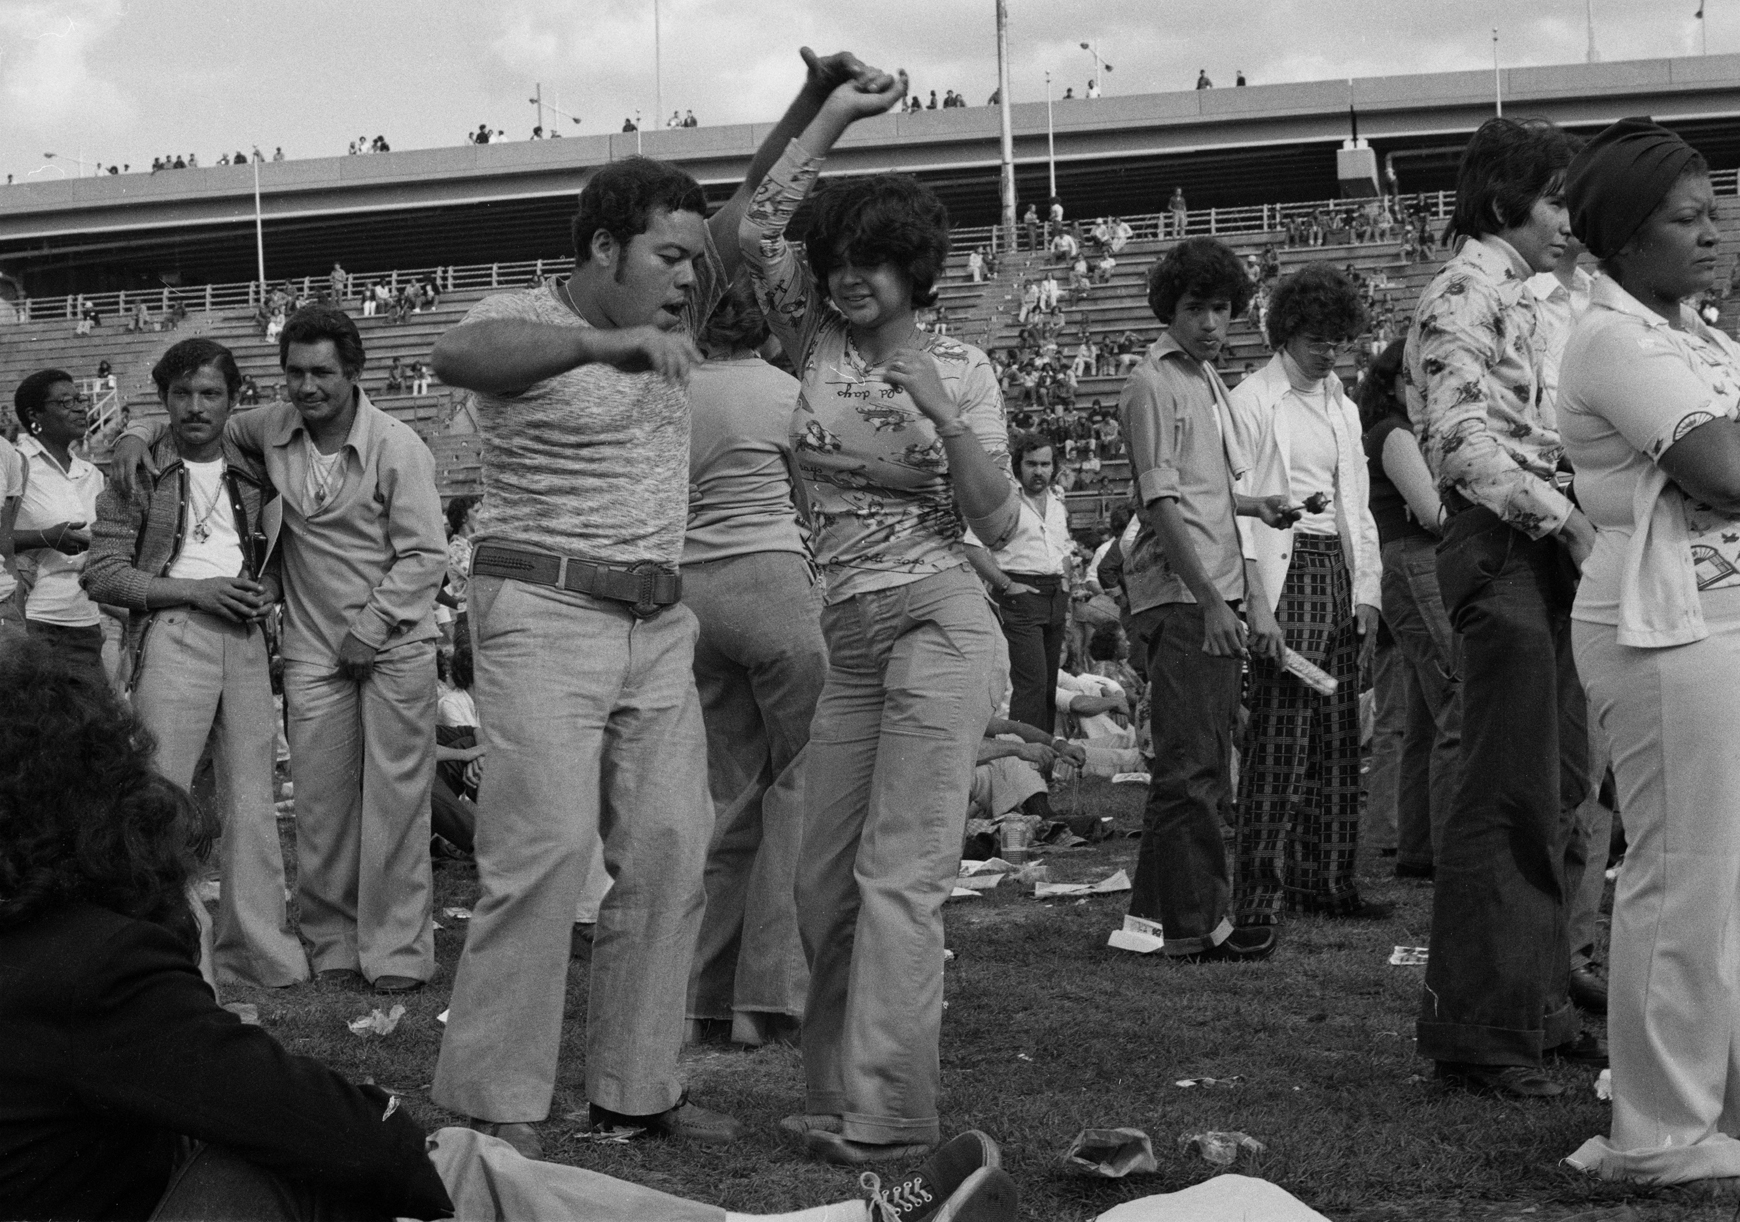 A casually dressed couple dances salsa with people in the background on Randall's Island in 1974.